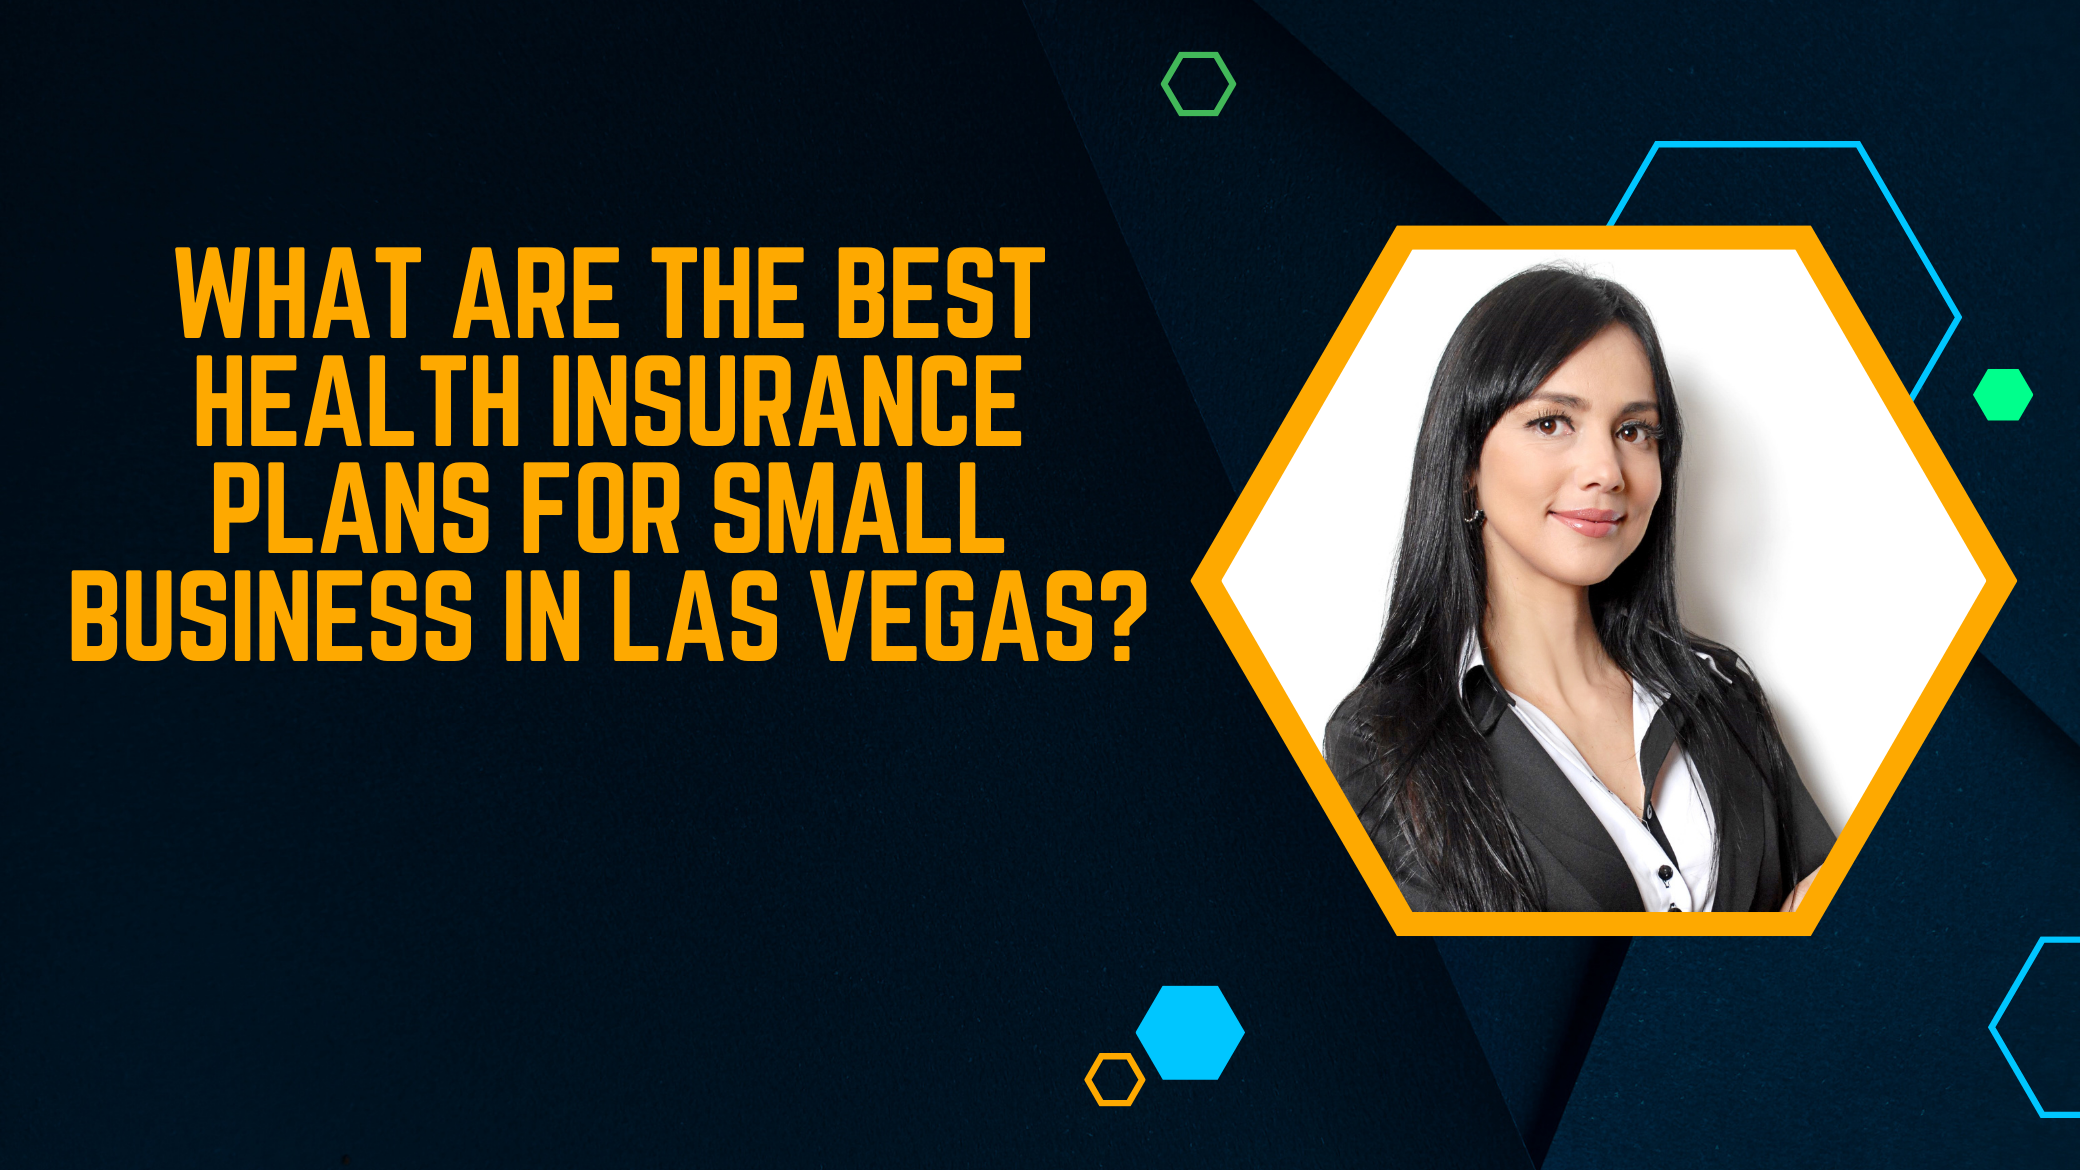 What Are The Best Health Insurance Plans For Small Business In Las Vegas